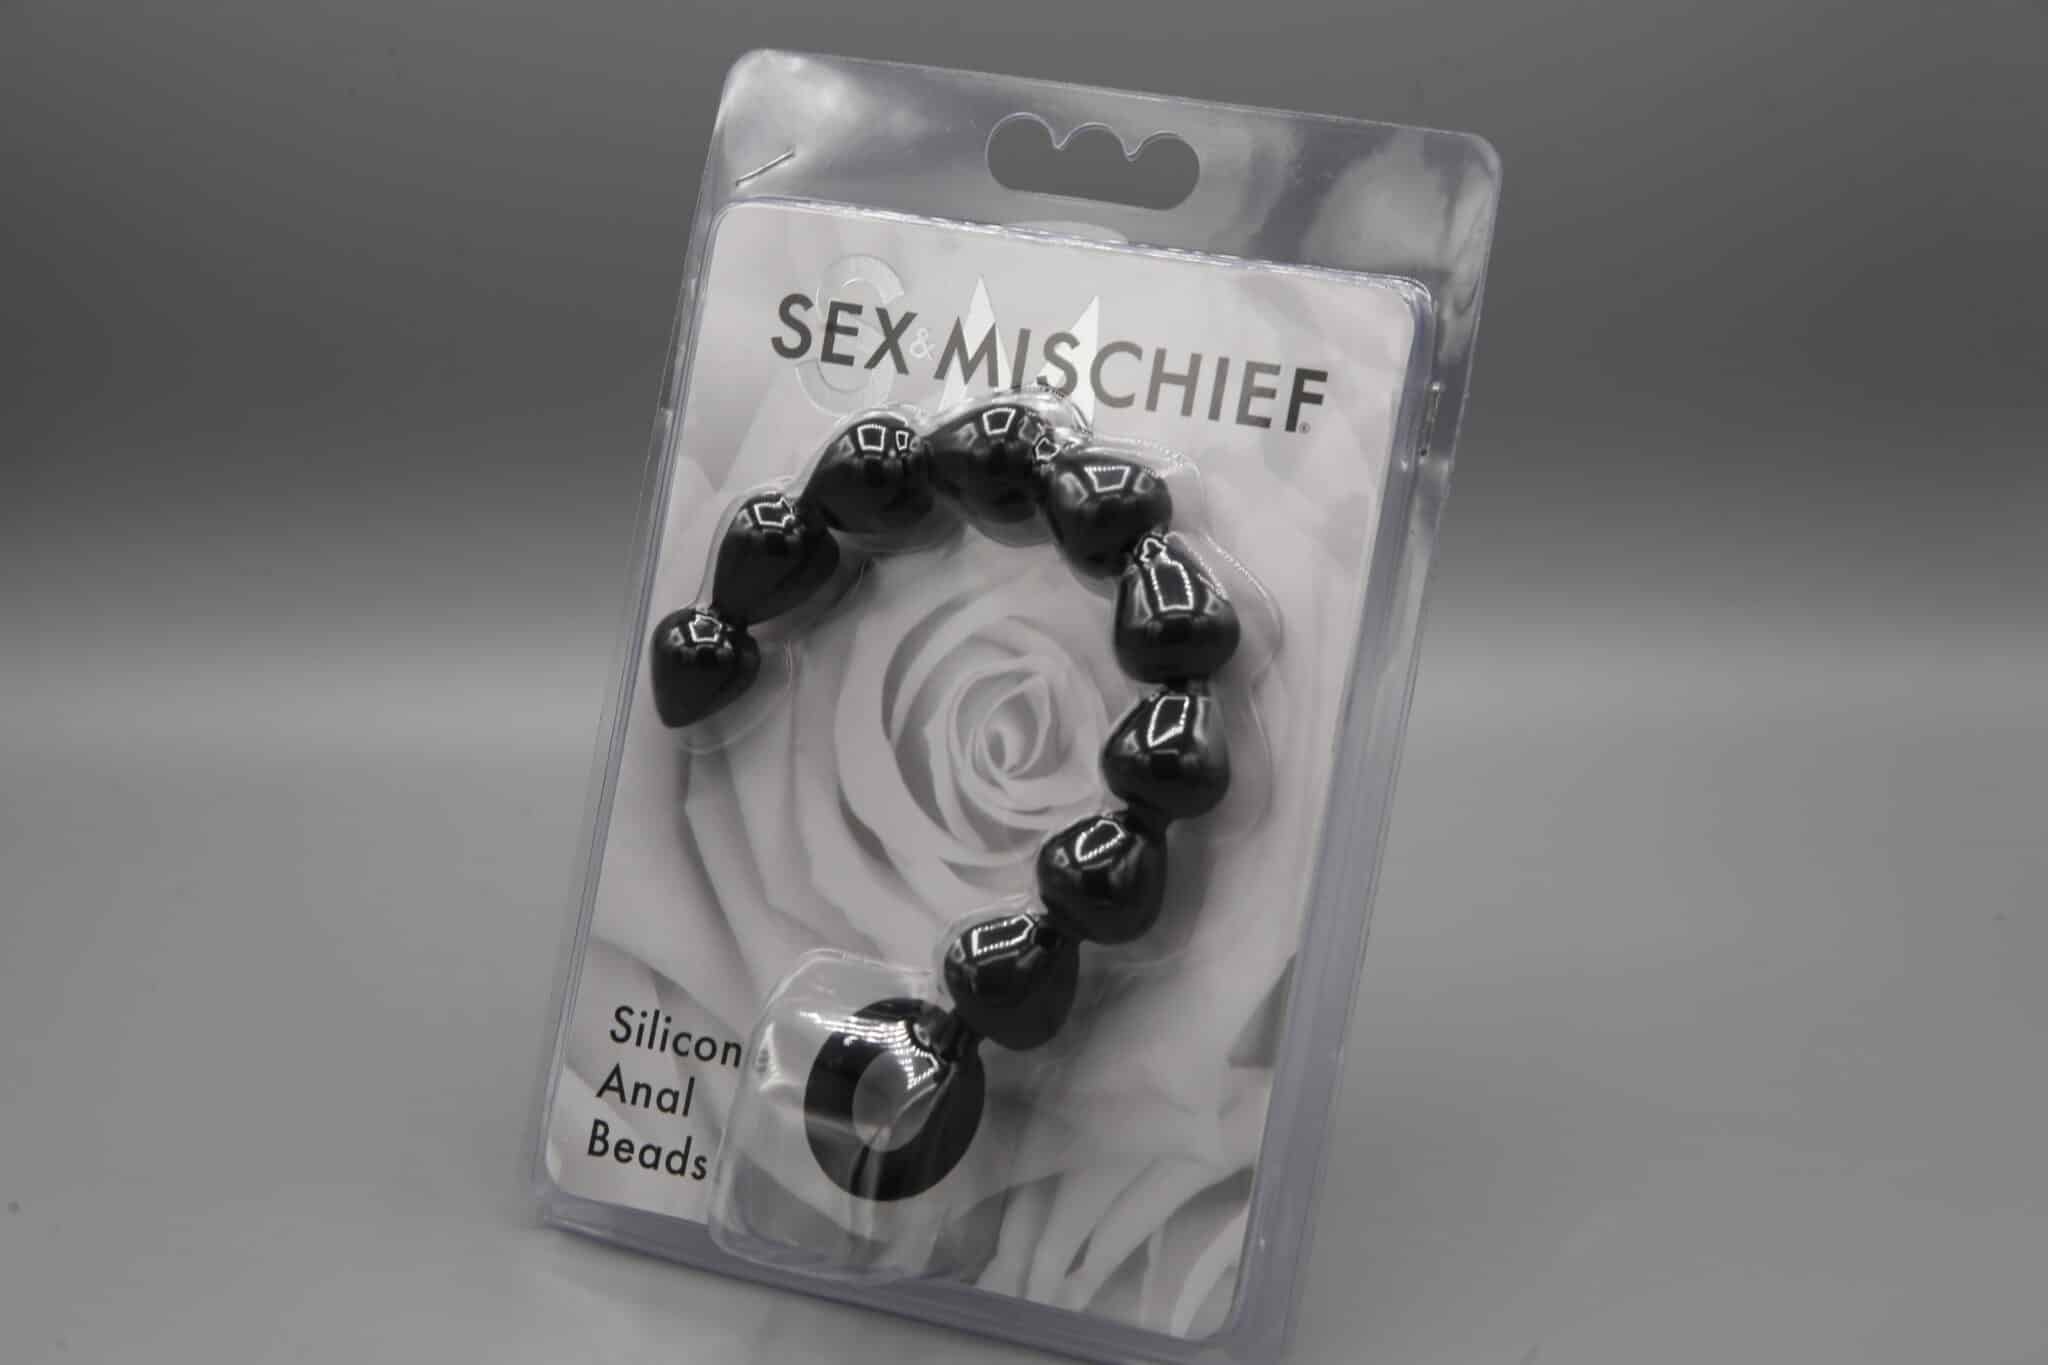 Sex and Mischief Anal Beads. Slide 8